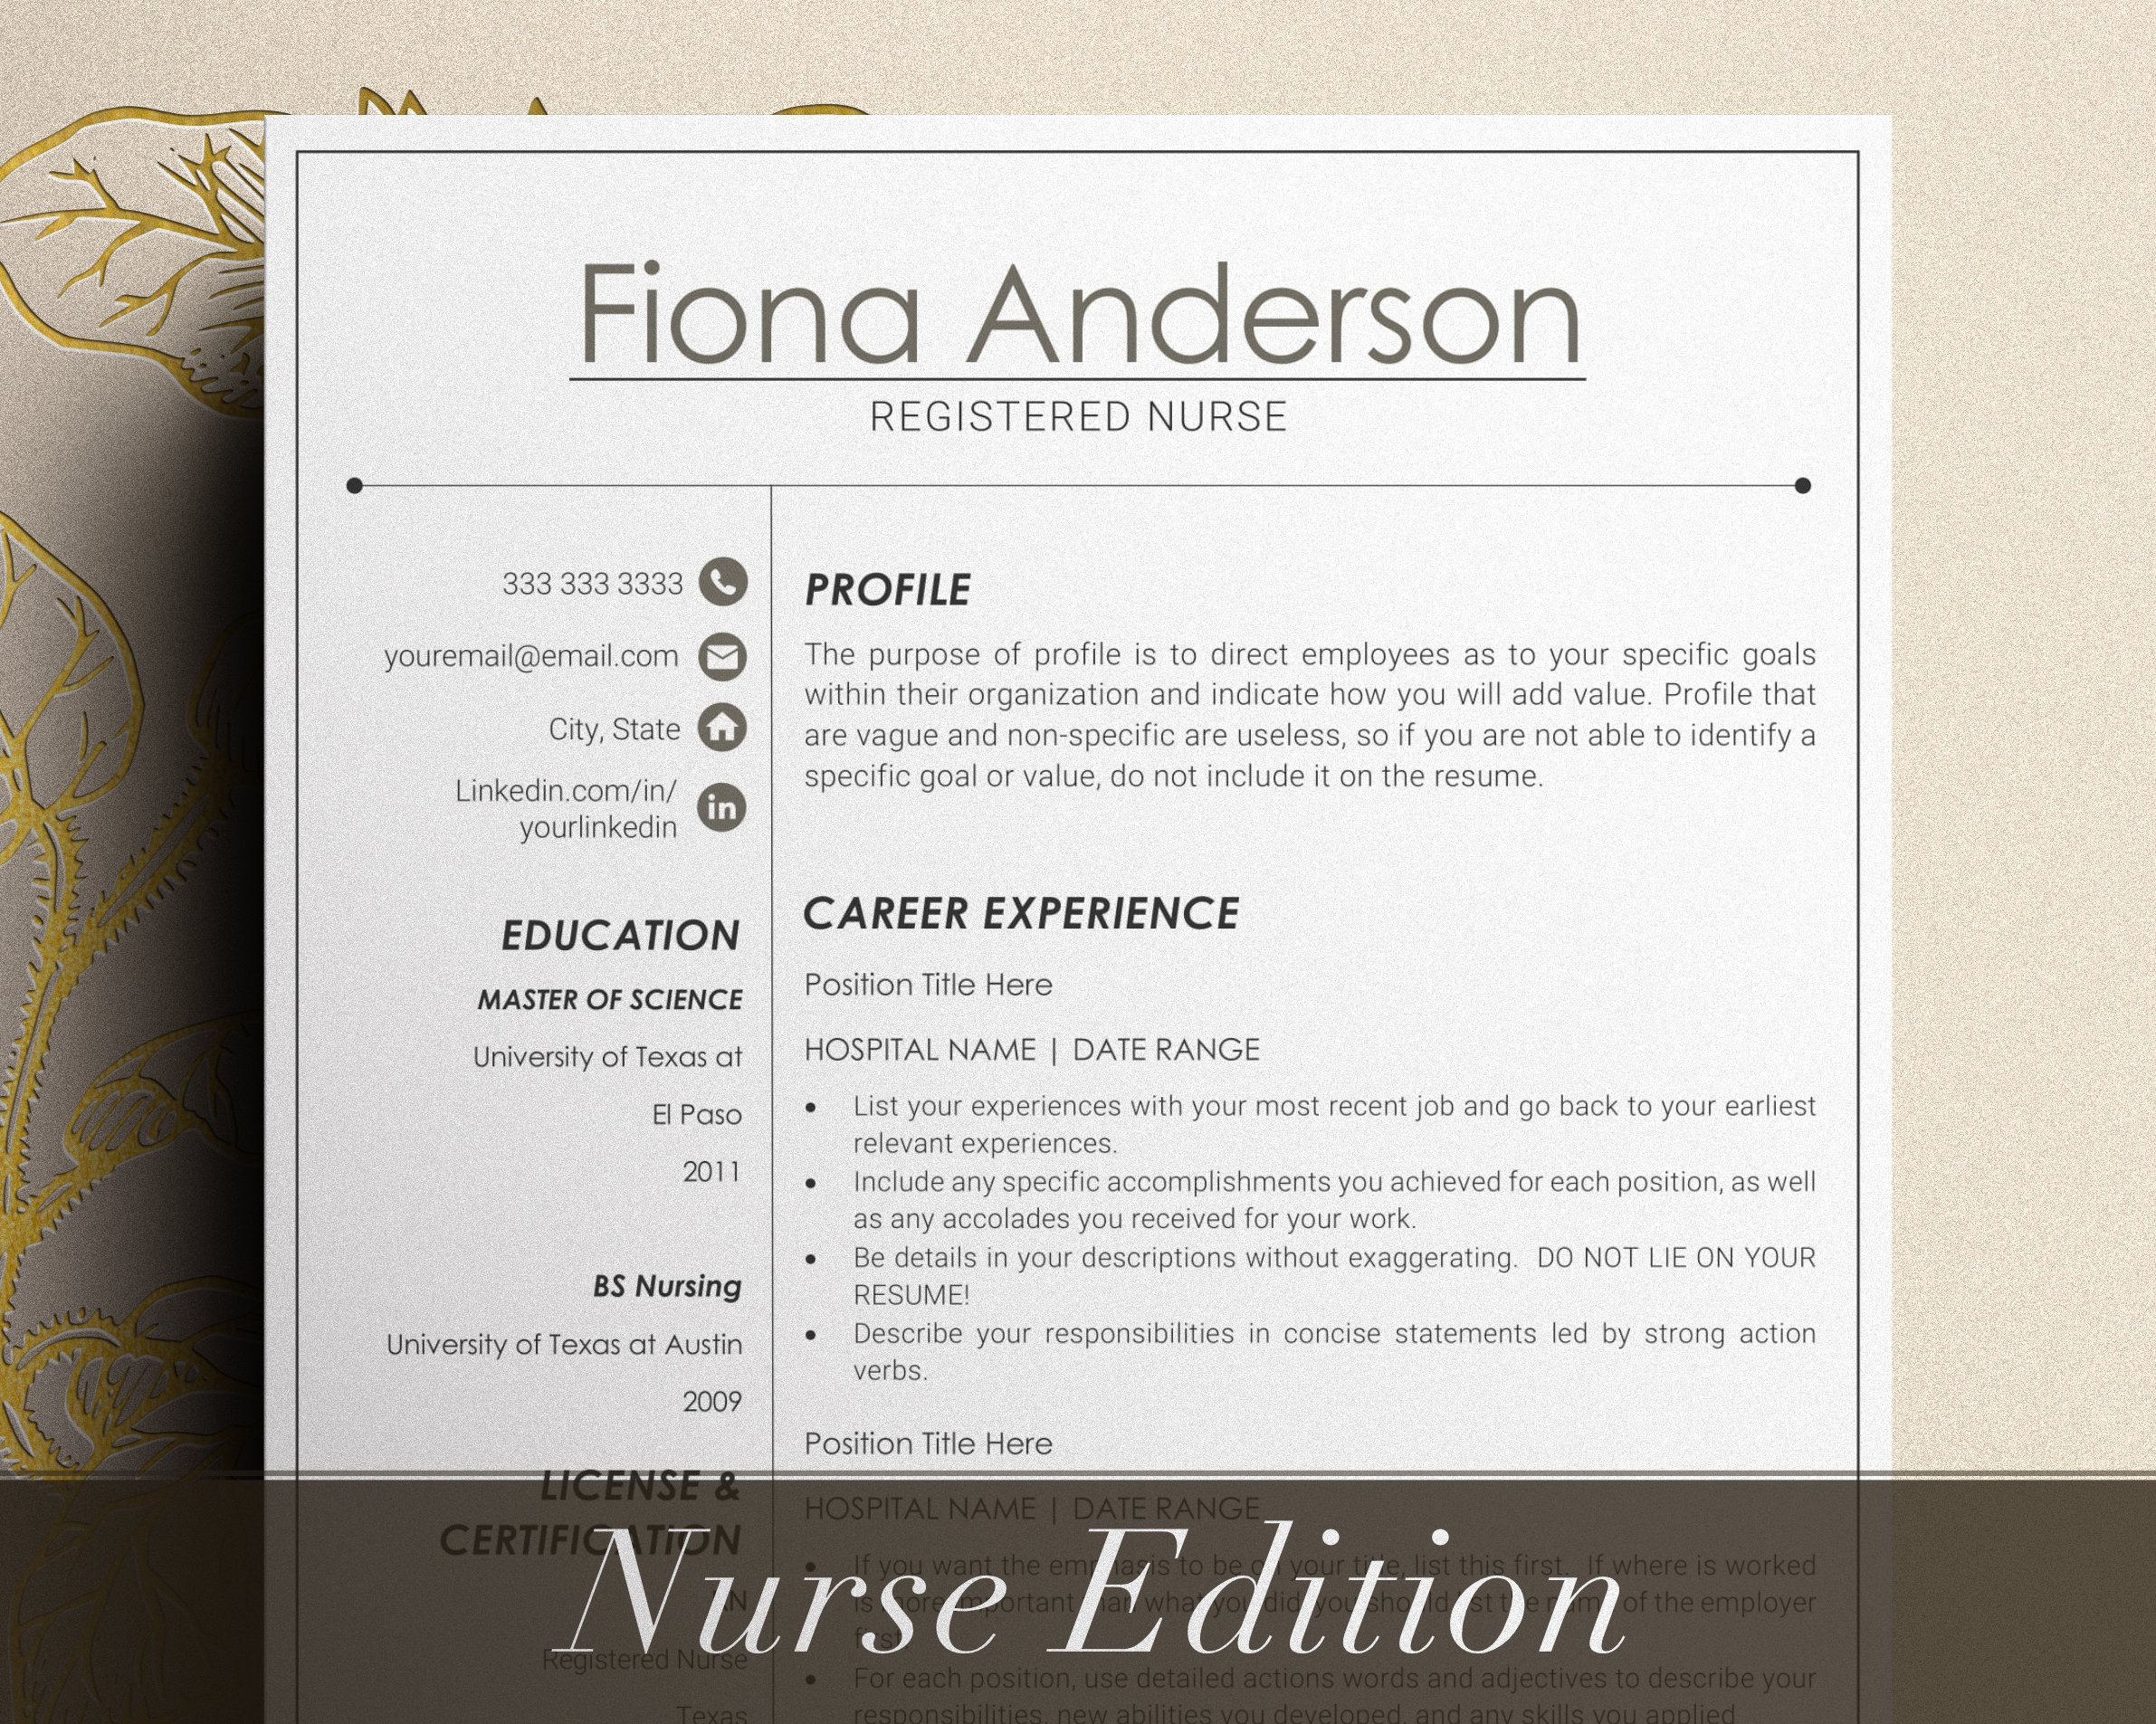 Professional nurse resume with a gold border.